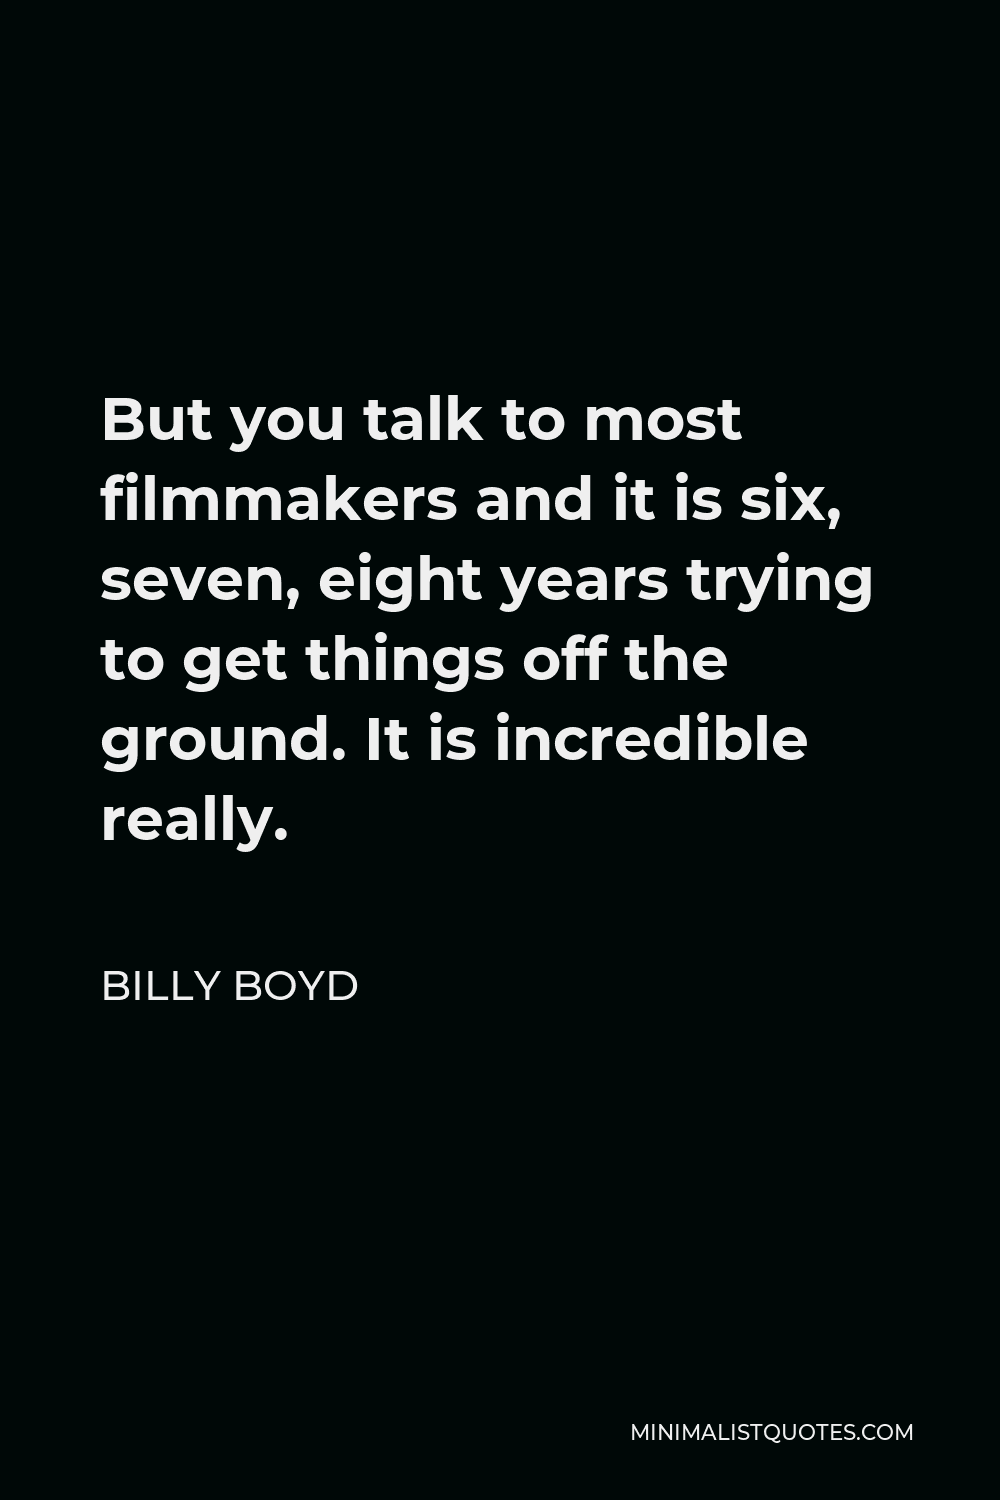 Billy Boyd Quote - But you talk to most filmmakers and it is six, seven, eight years trying to get things off the ground. It is incredible really.